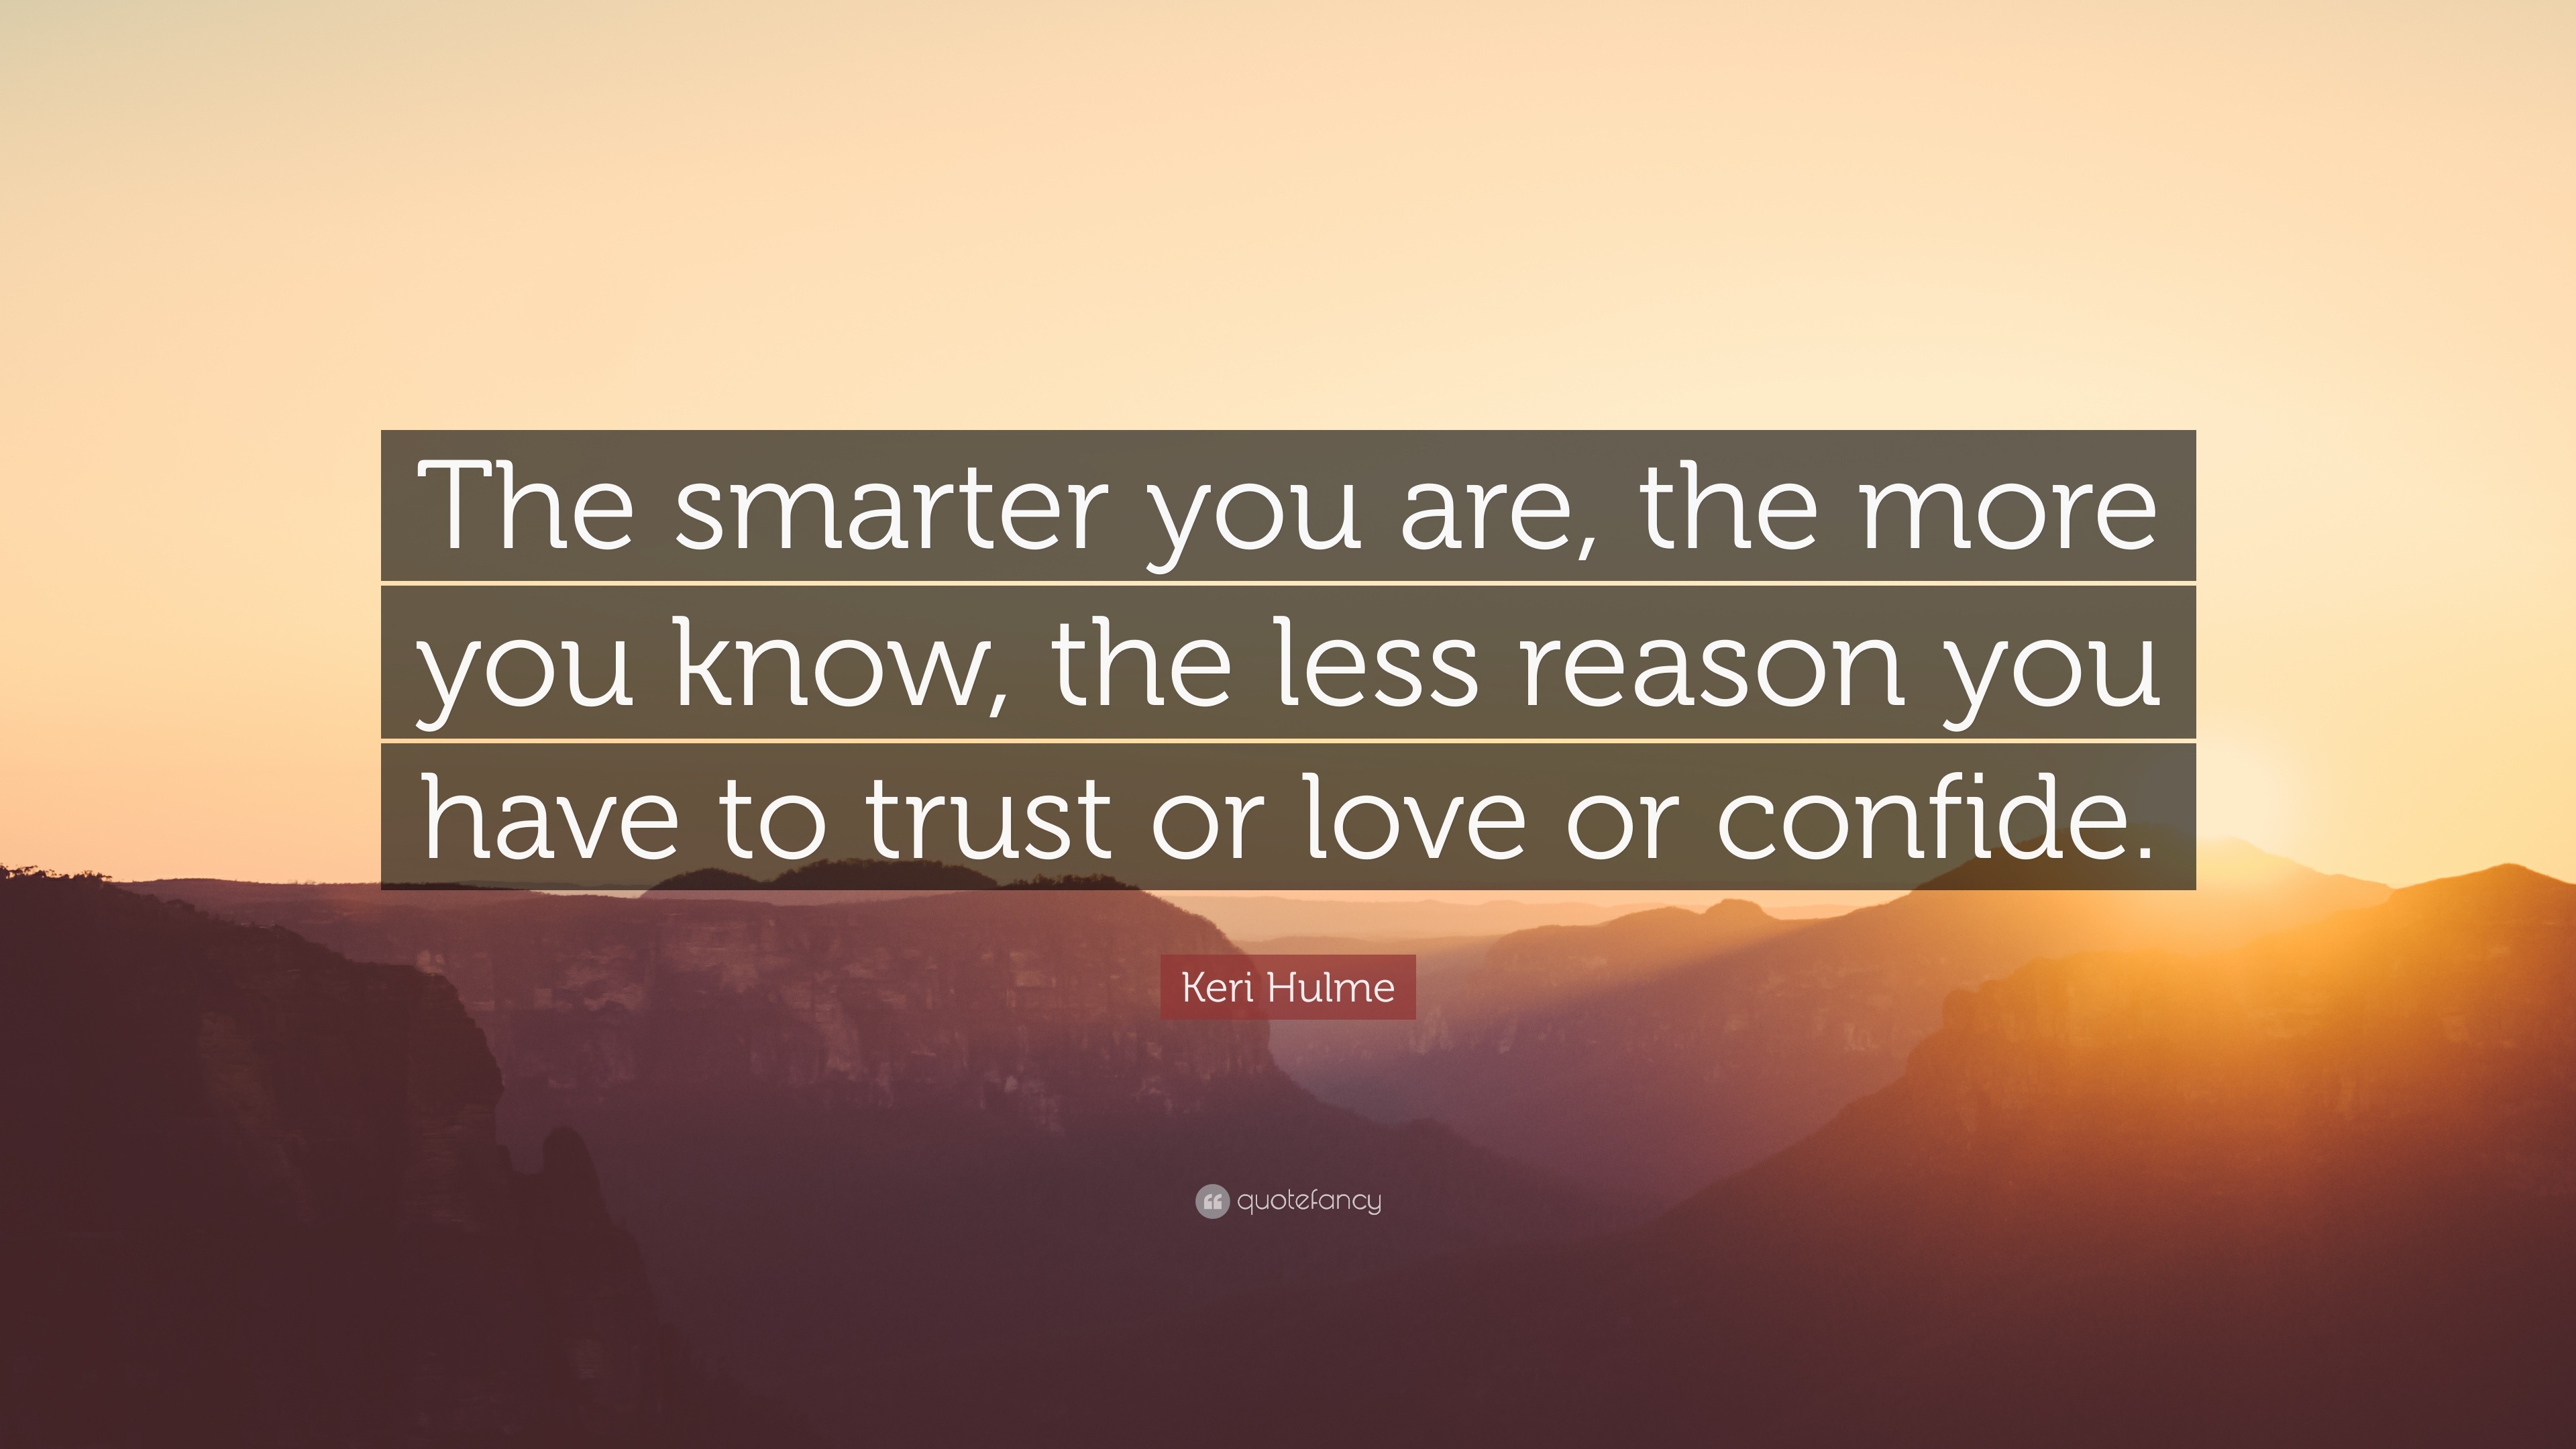 The smarter you are, the more you know, the less reason you have to trust o...